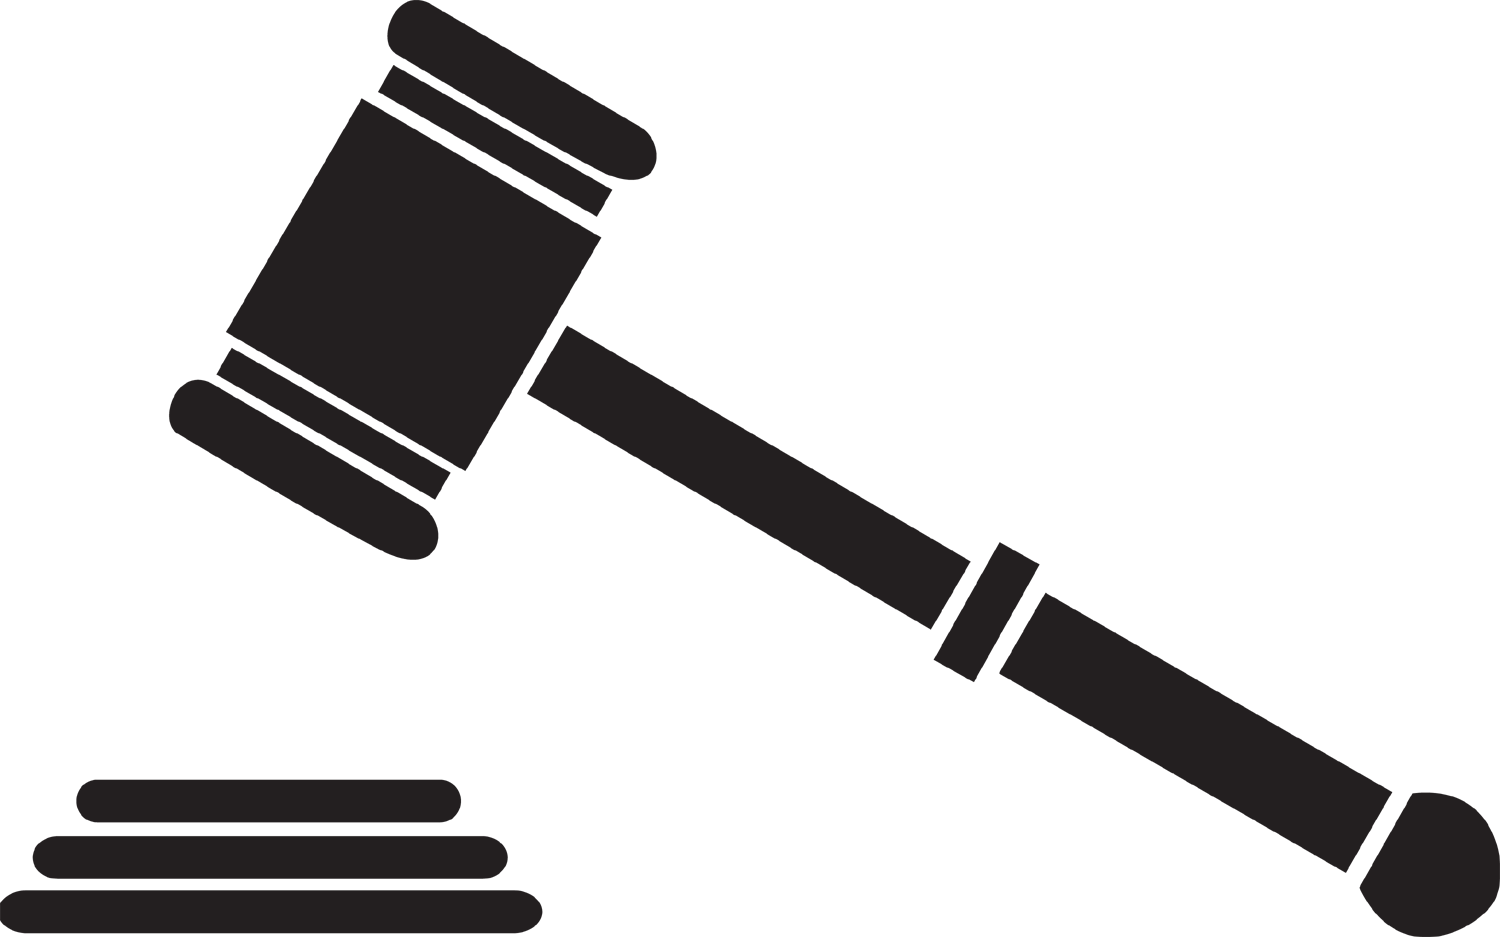 Gavel Png - ClipArt Best